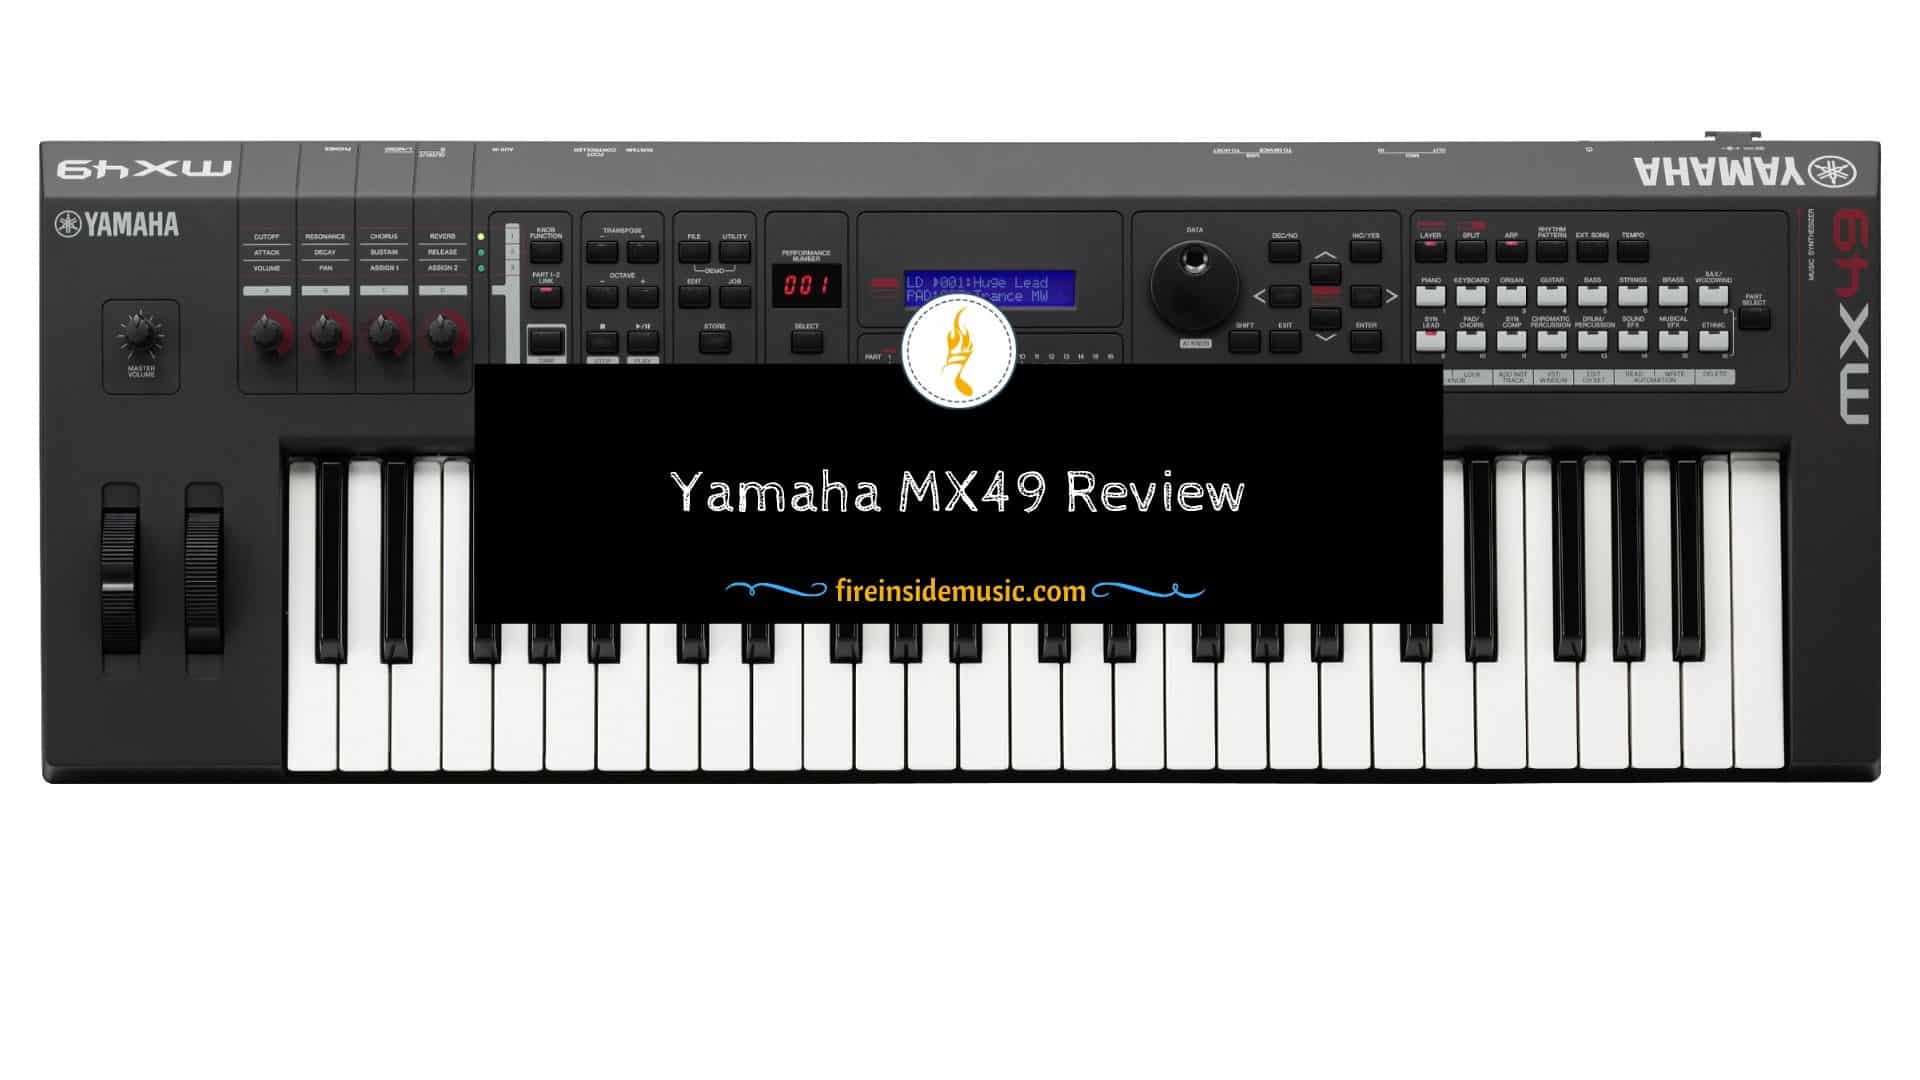 Yamaha MX49 Review: An Awesome Synthesizer You Should Own